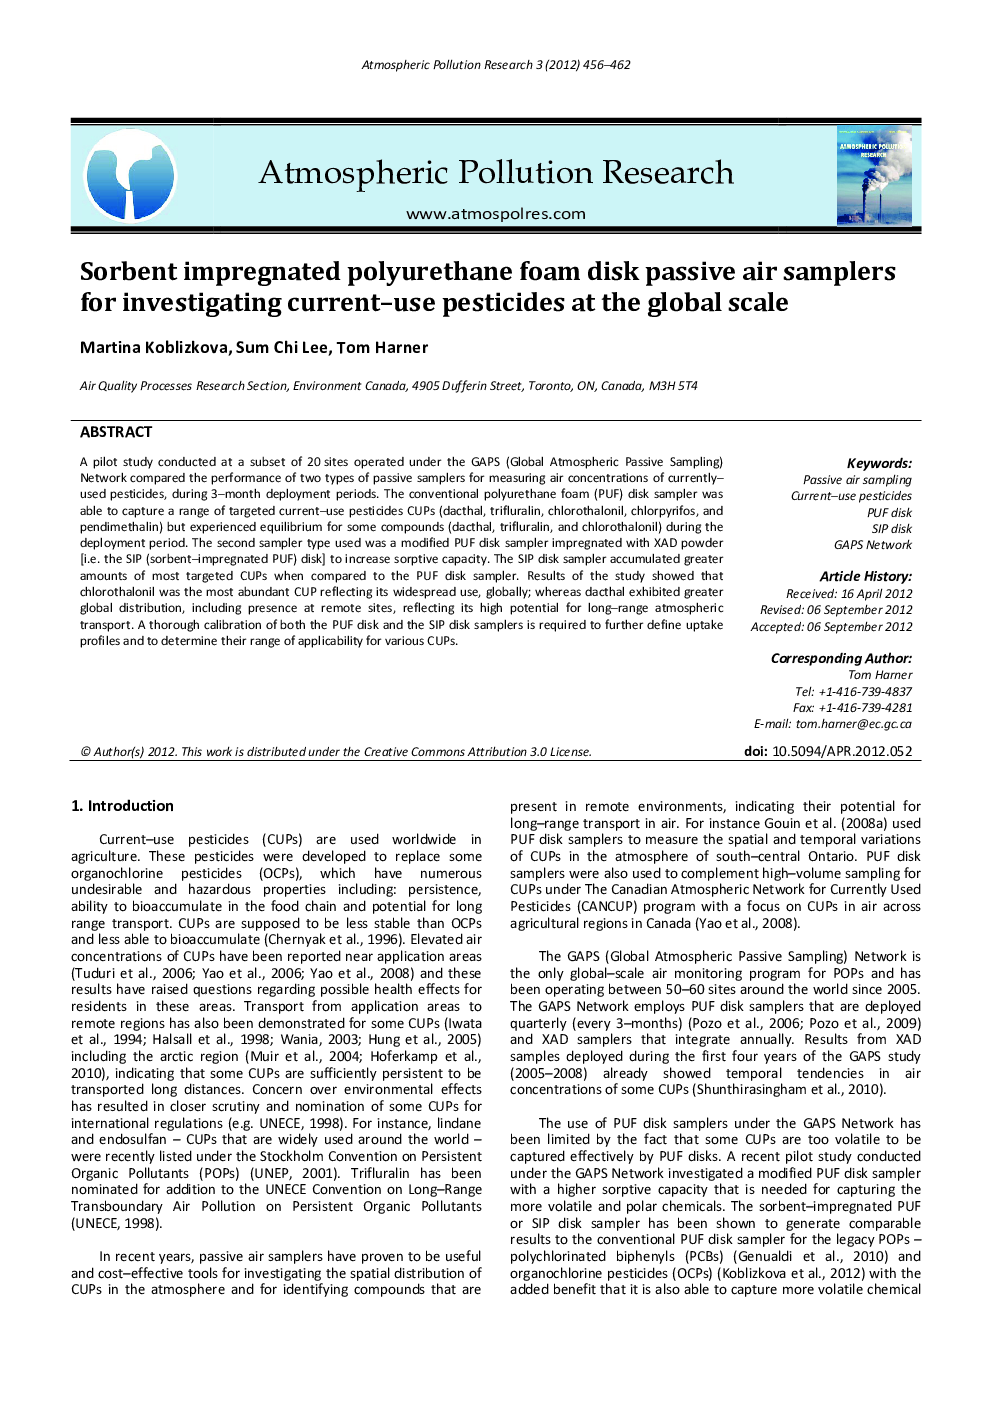 Sorbent impregnated polyurethane foam disk passive air samplers for investigating current-use pesticides at the global scale